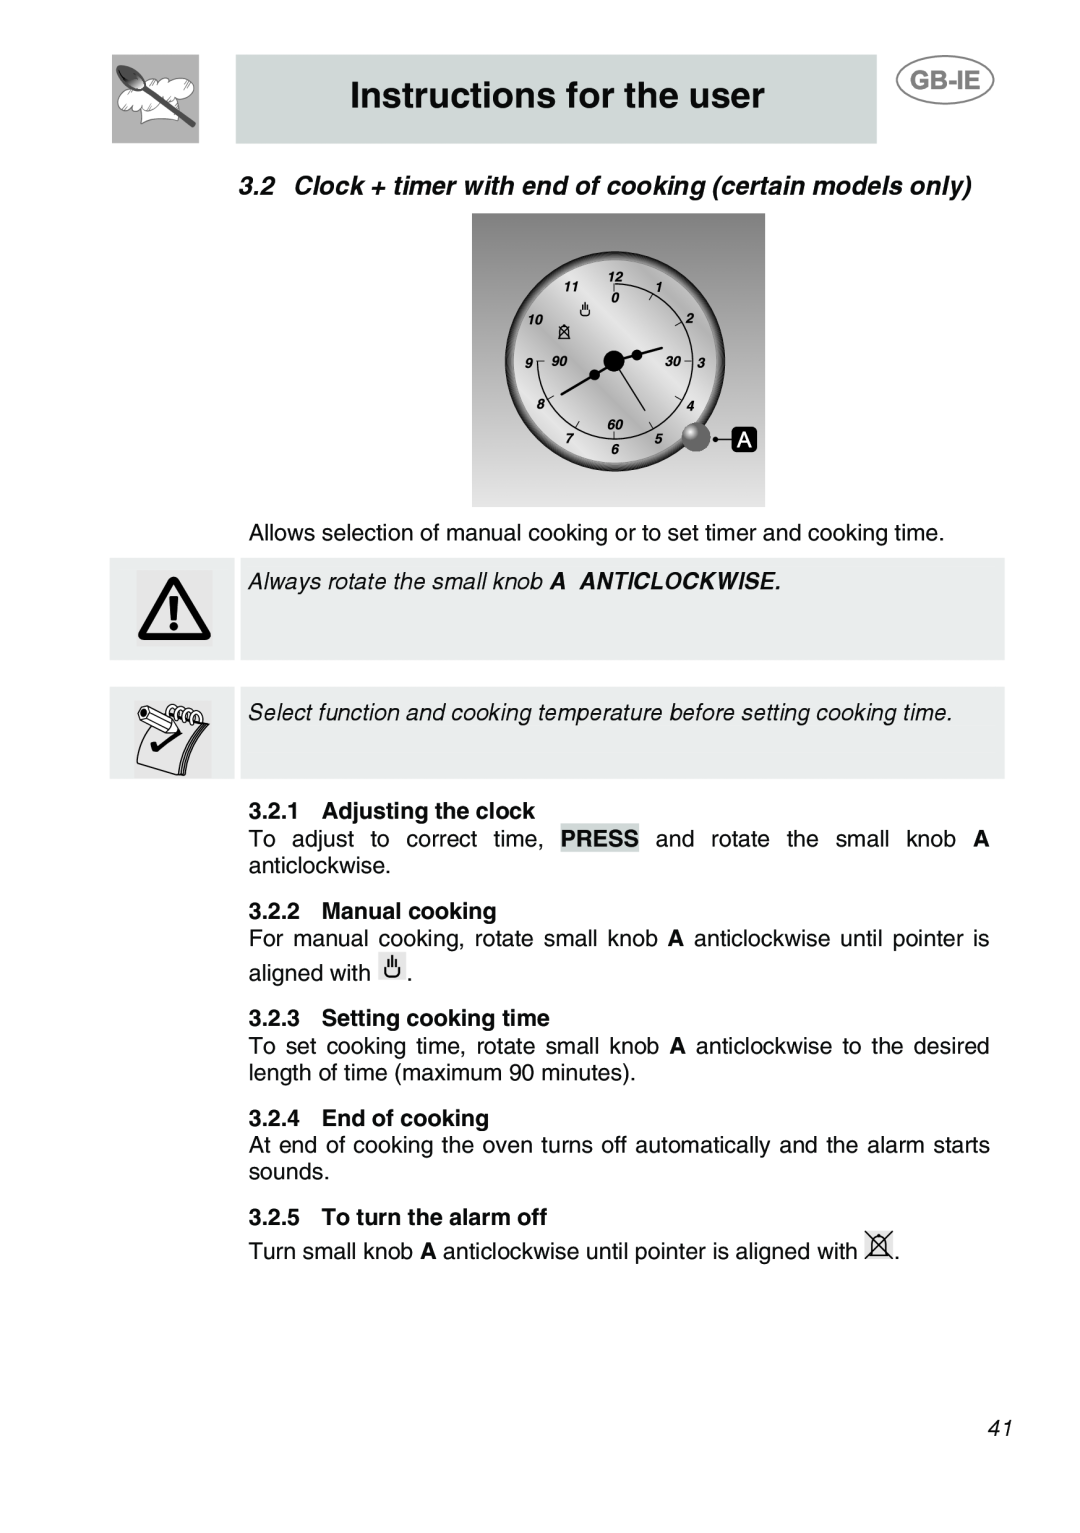 Smeg SC166PZ manual Clock + timer with end of cooking certain models only, Instructions for the user, Adjusting the clock 